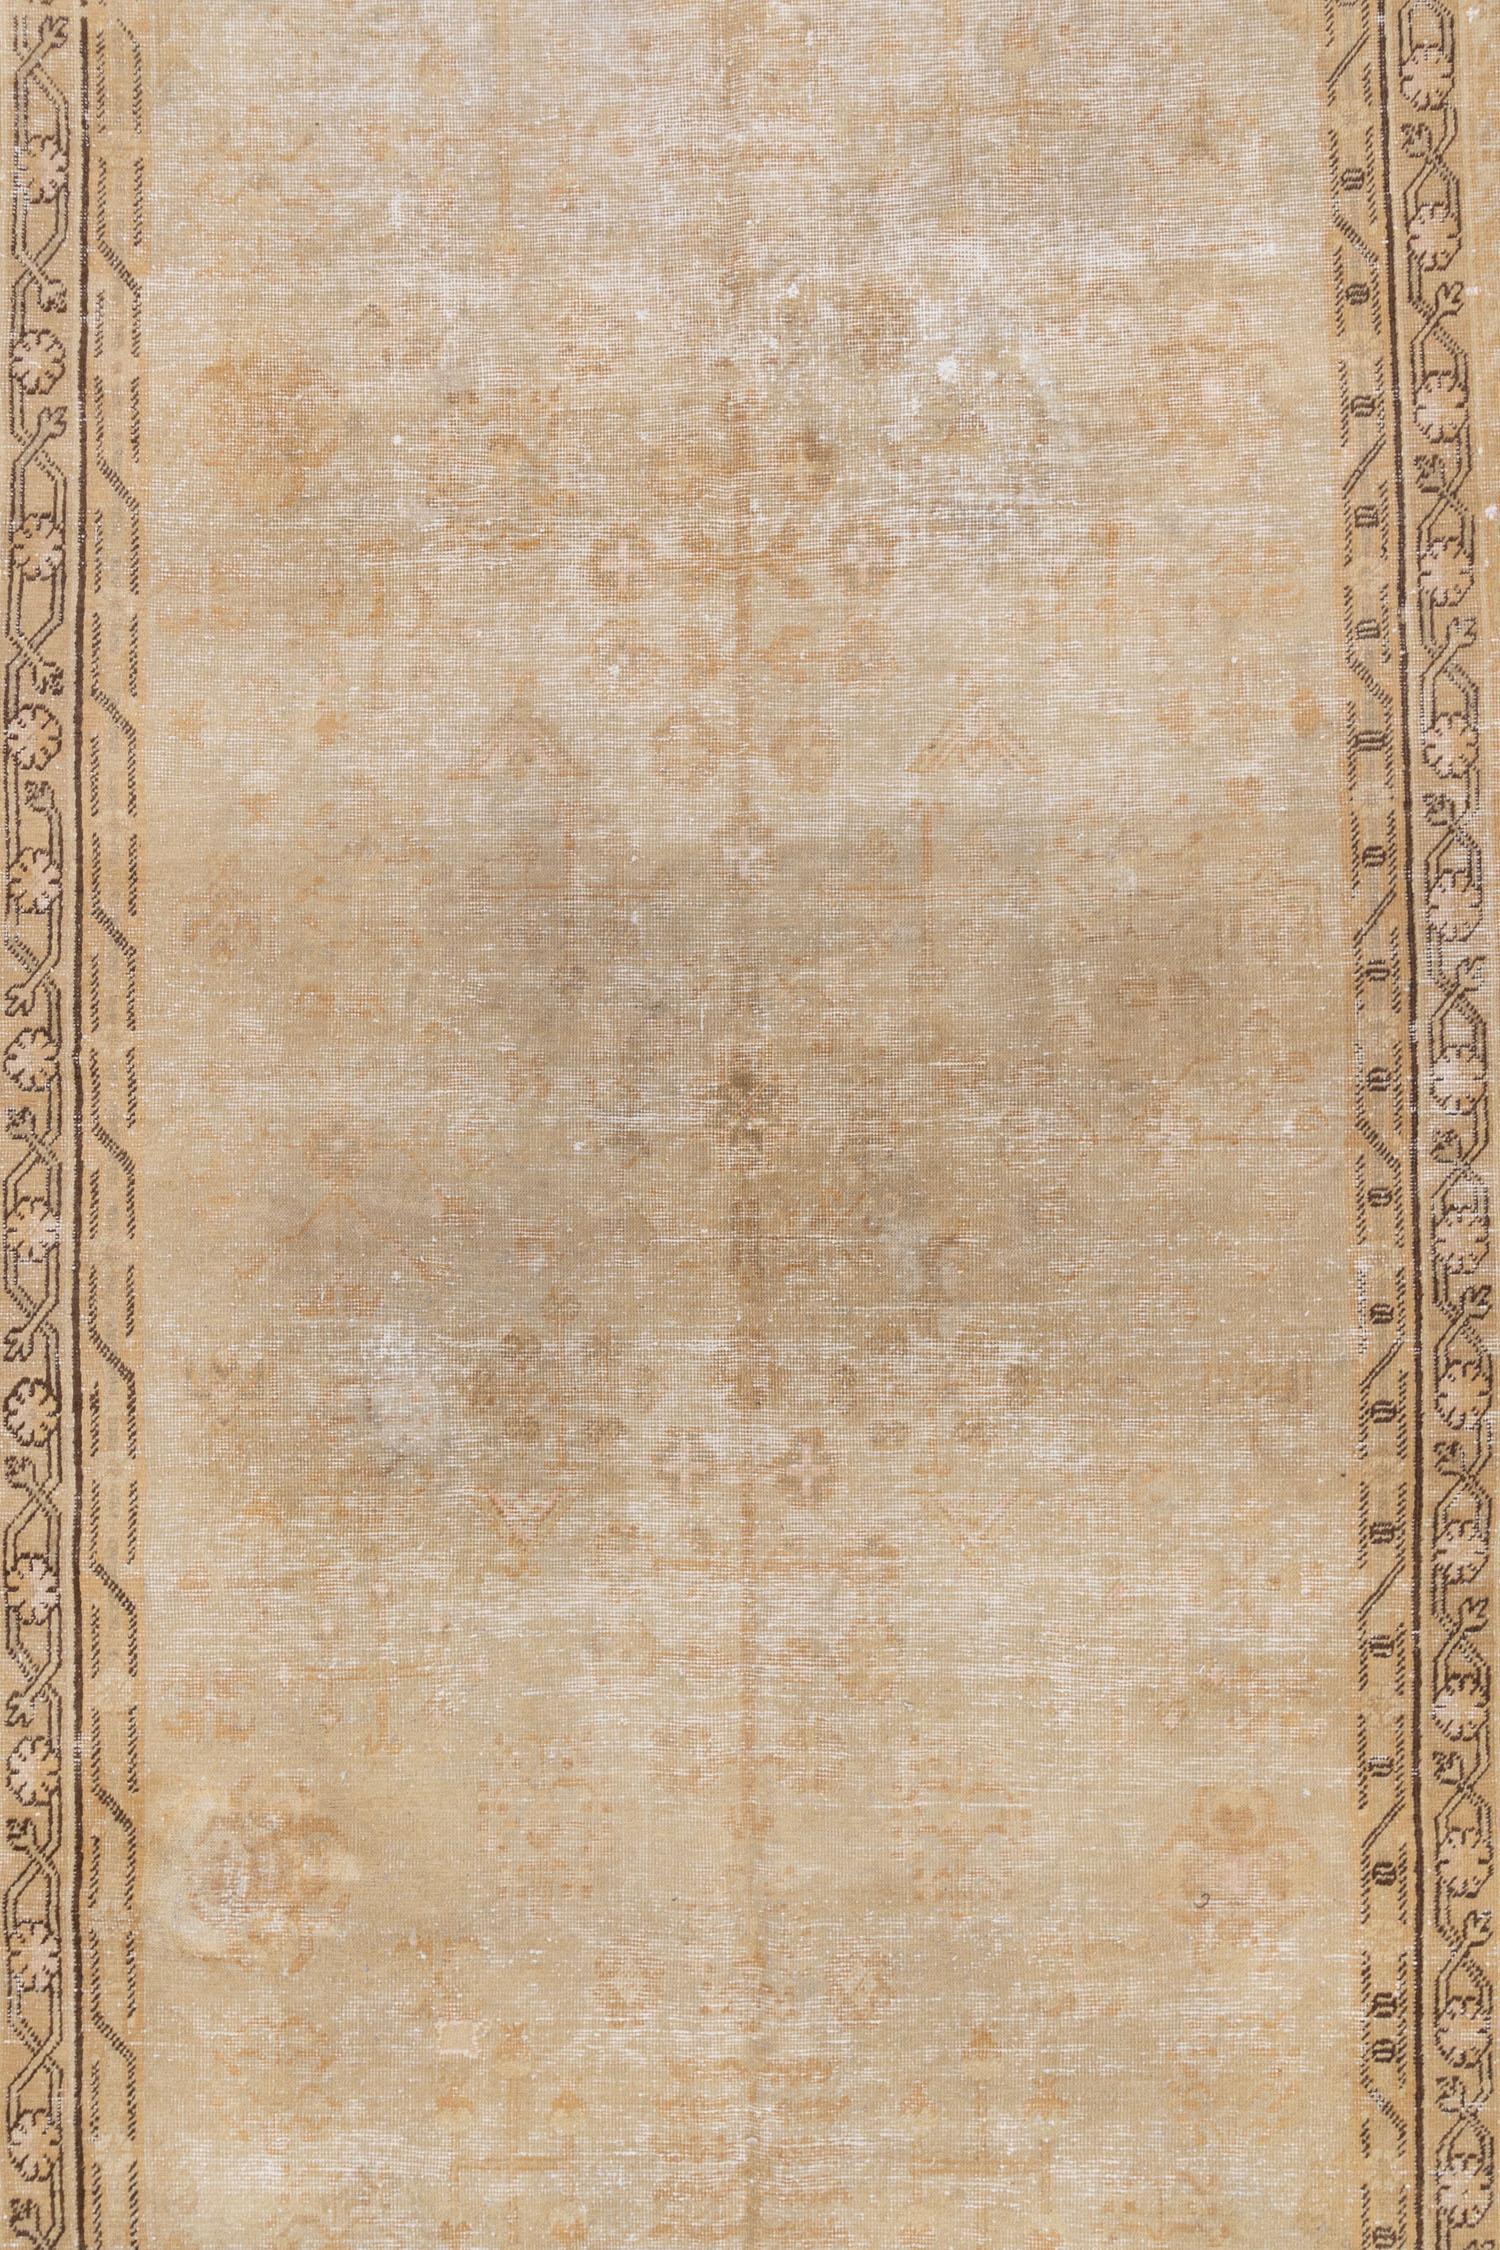 Fantastic antique Khotan runner with a simple aesthetic and lovely patina.